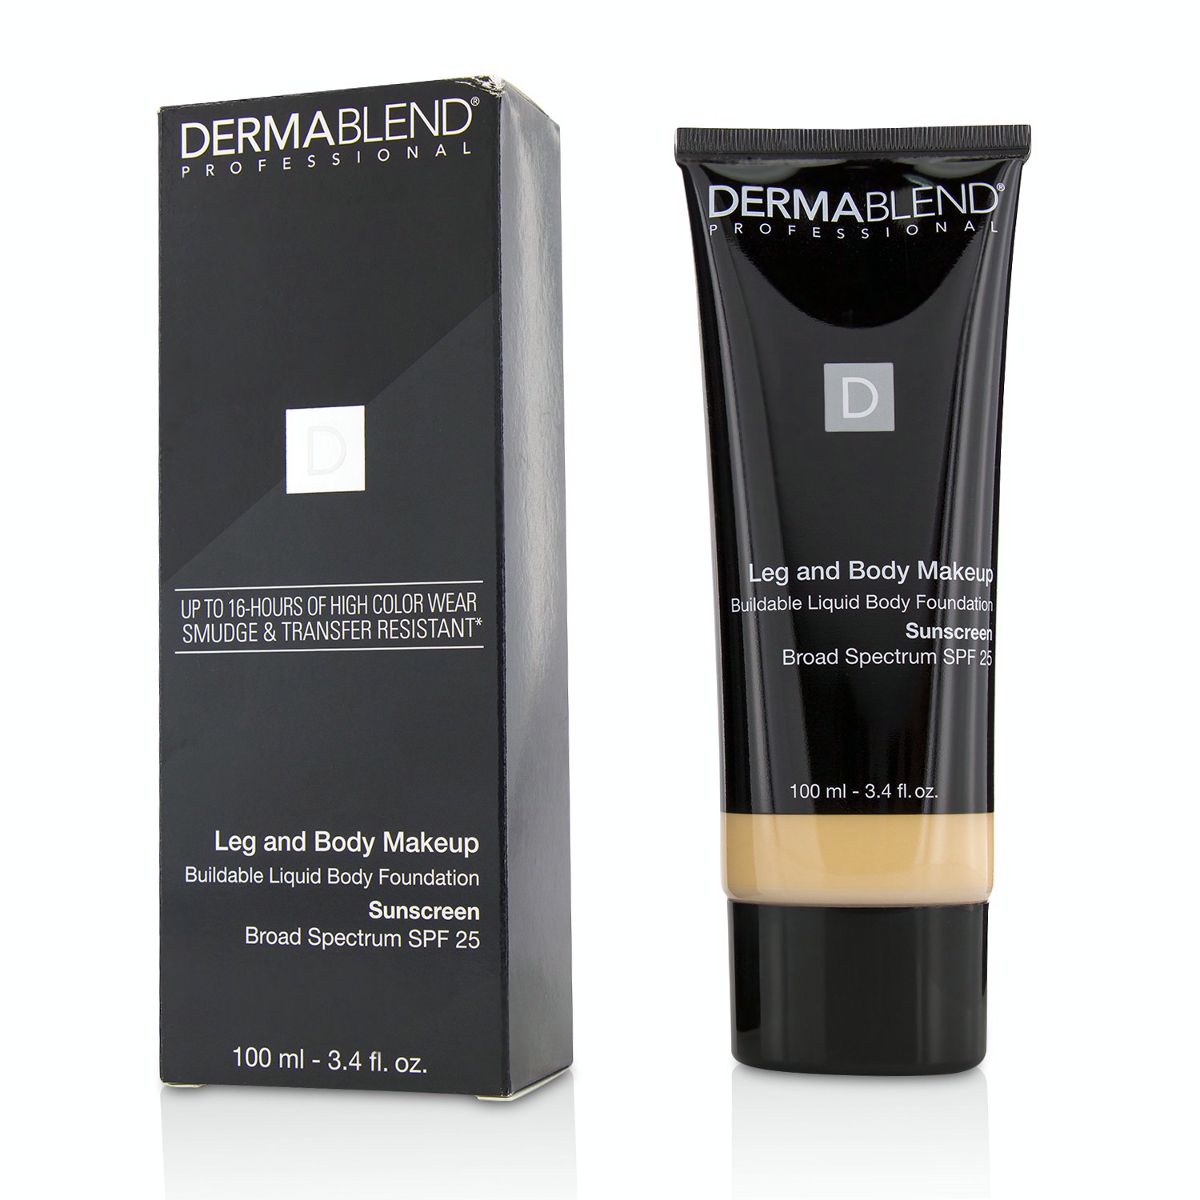 Leg and Body Make Up Buildable Liquid Body Foundation Sunscreen Broad Spectrum SPF 25 - #Fair Ivory 10N Dermablend Image